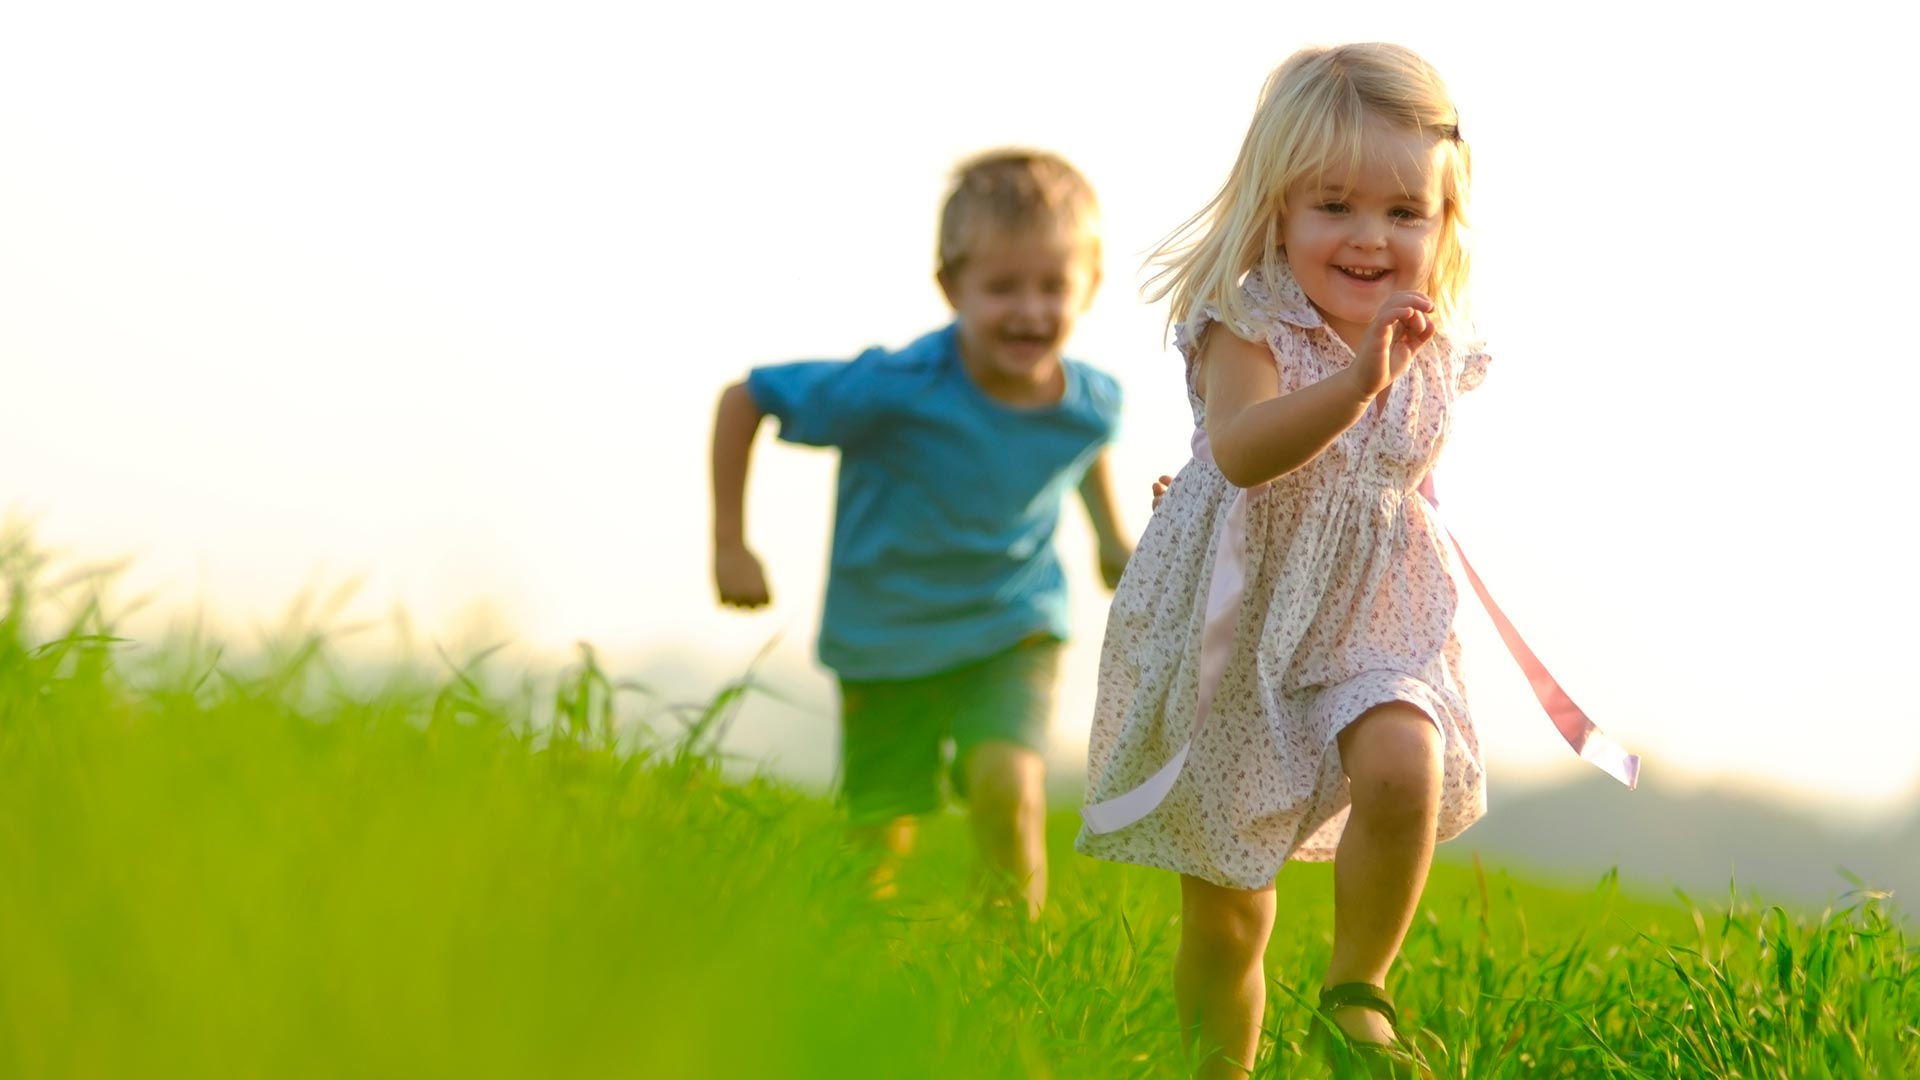 Hd Images Of Kids - Boy And Girl Happy - HD Wallpaper 